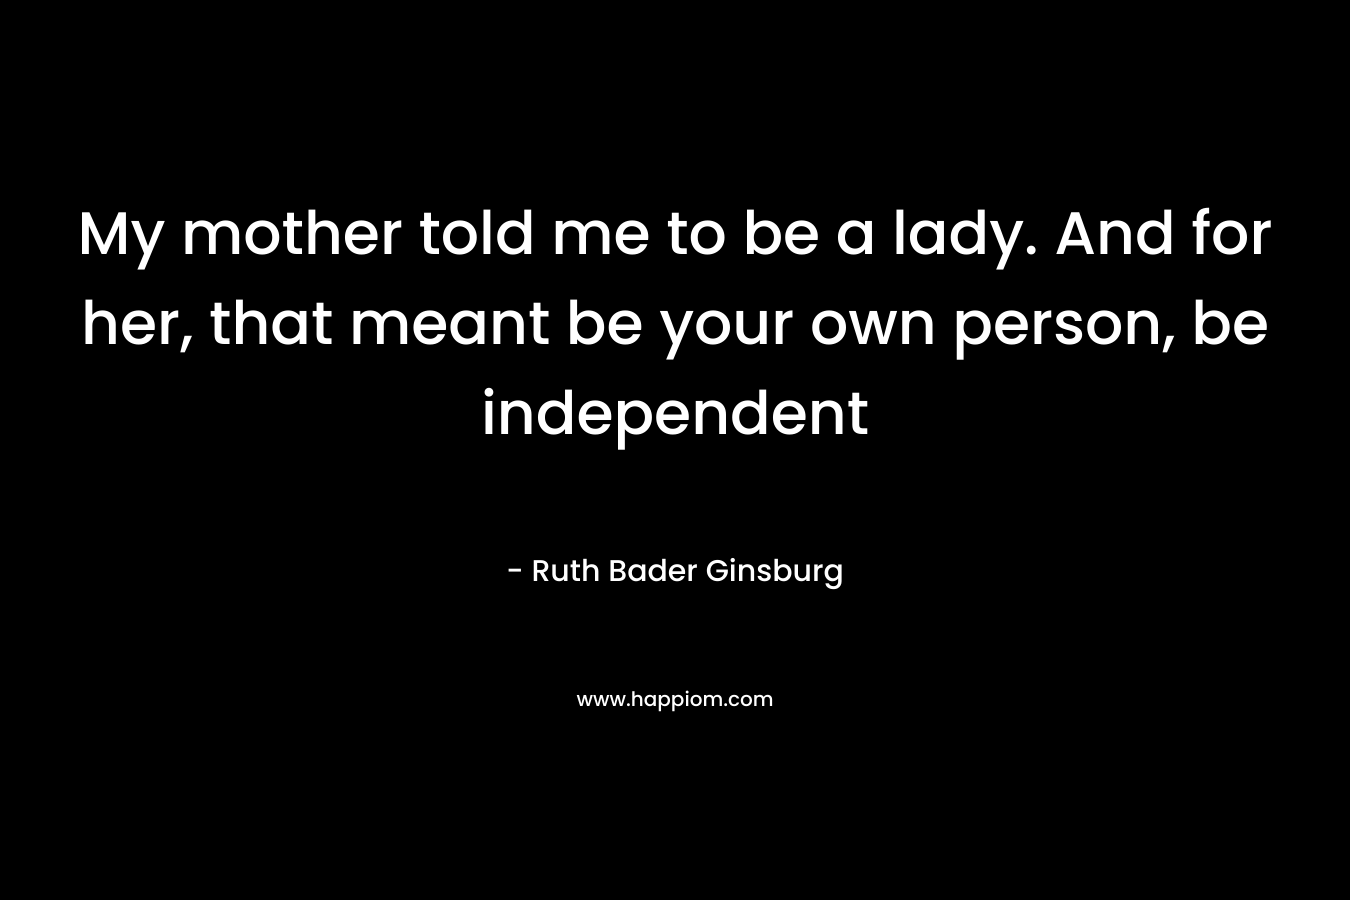 My mother told me to be a lady. And for her, that meant be your own person, be independent